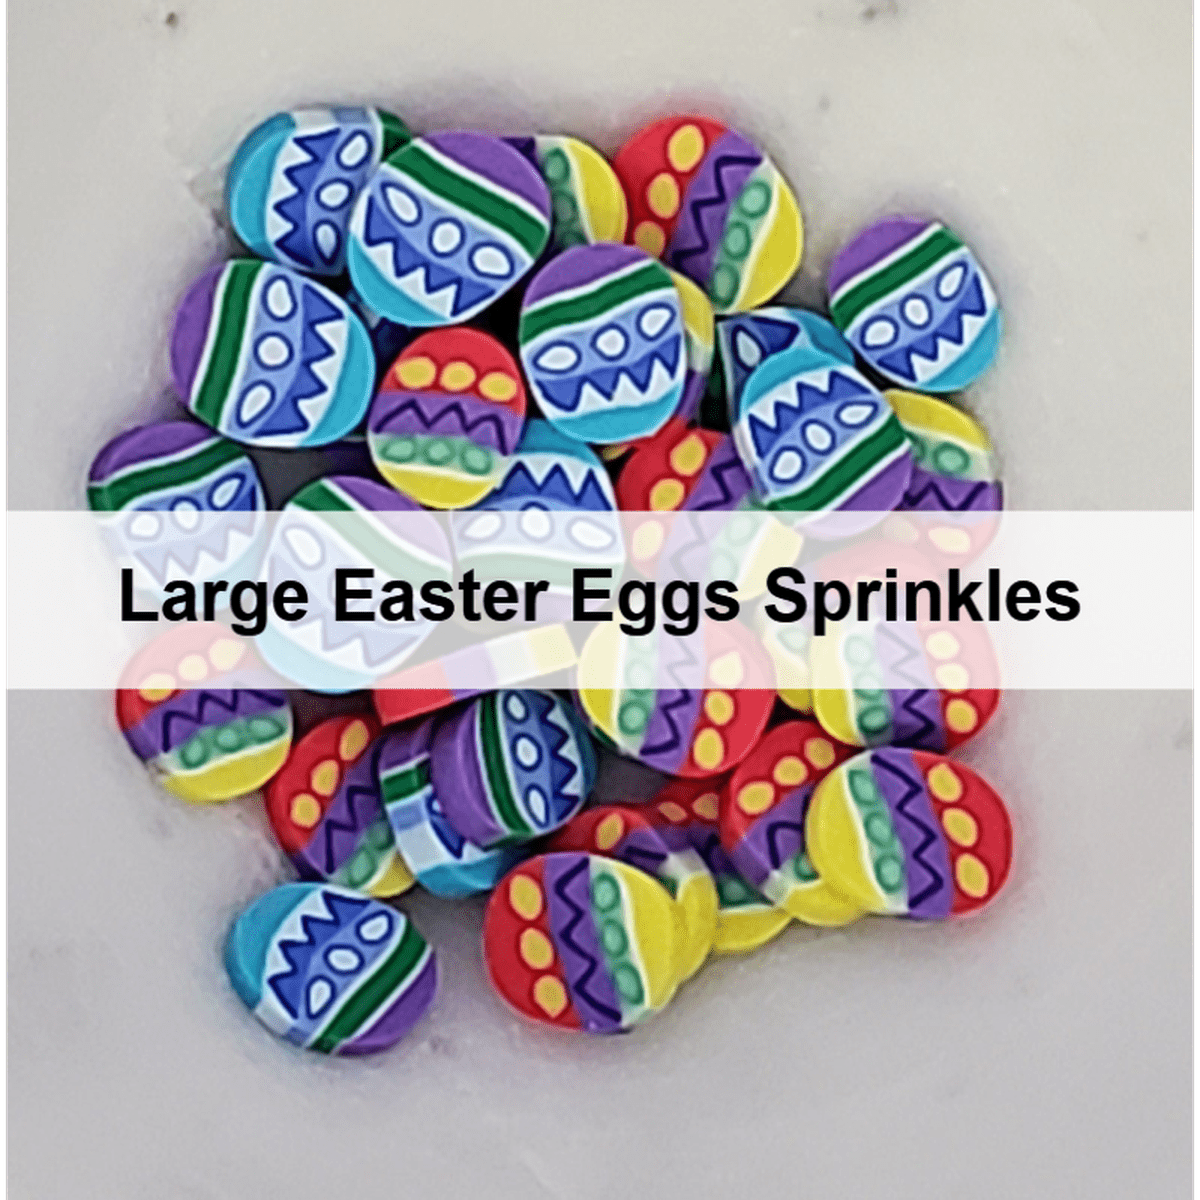 Large Easter Egg Sprinkles by Kat Scrappiness - Kat Scrappiness